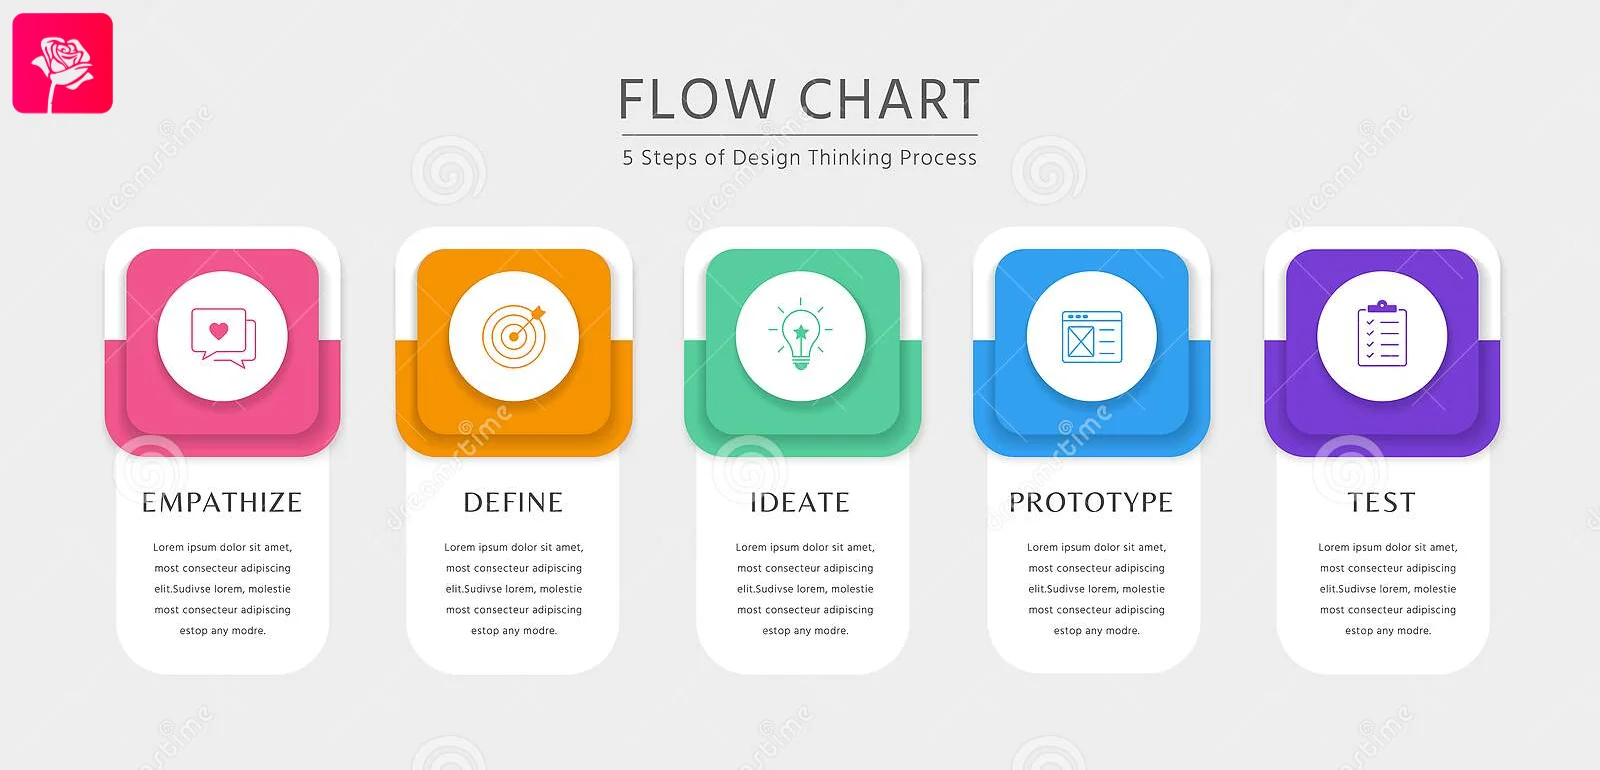 design-thinking-process-infographic-steps-colorful-flow-chart-emphasize-define-ideate-prototype-test